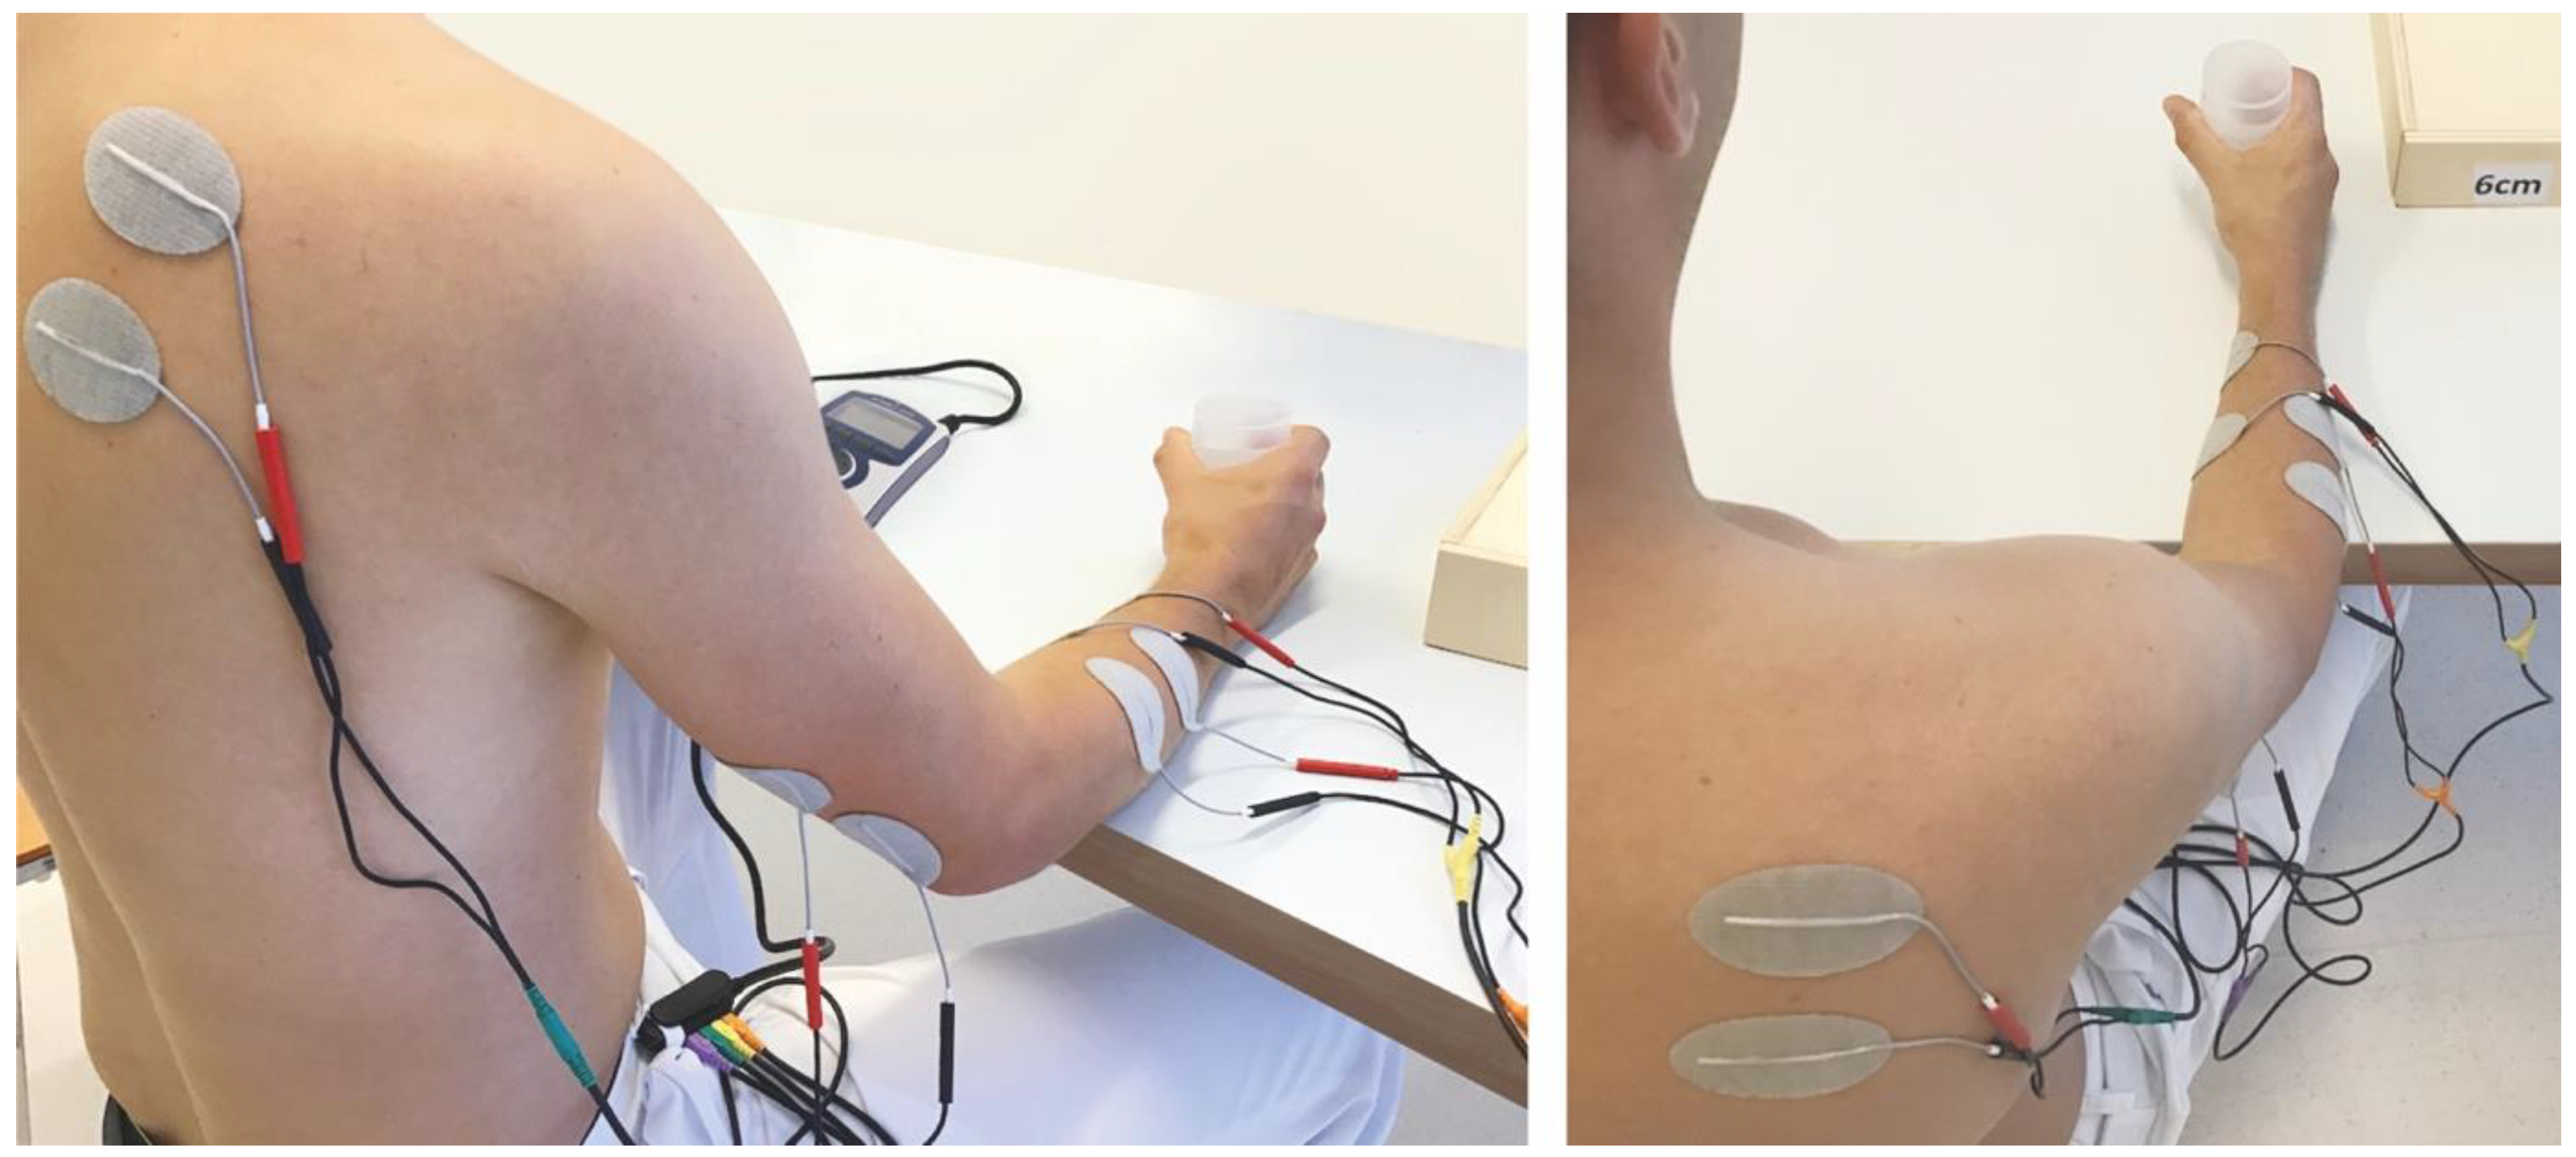 Will Electrical Stimulation Help Me Recover From Stroke?